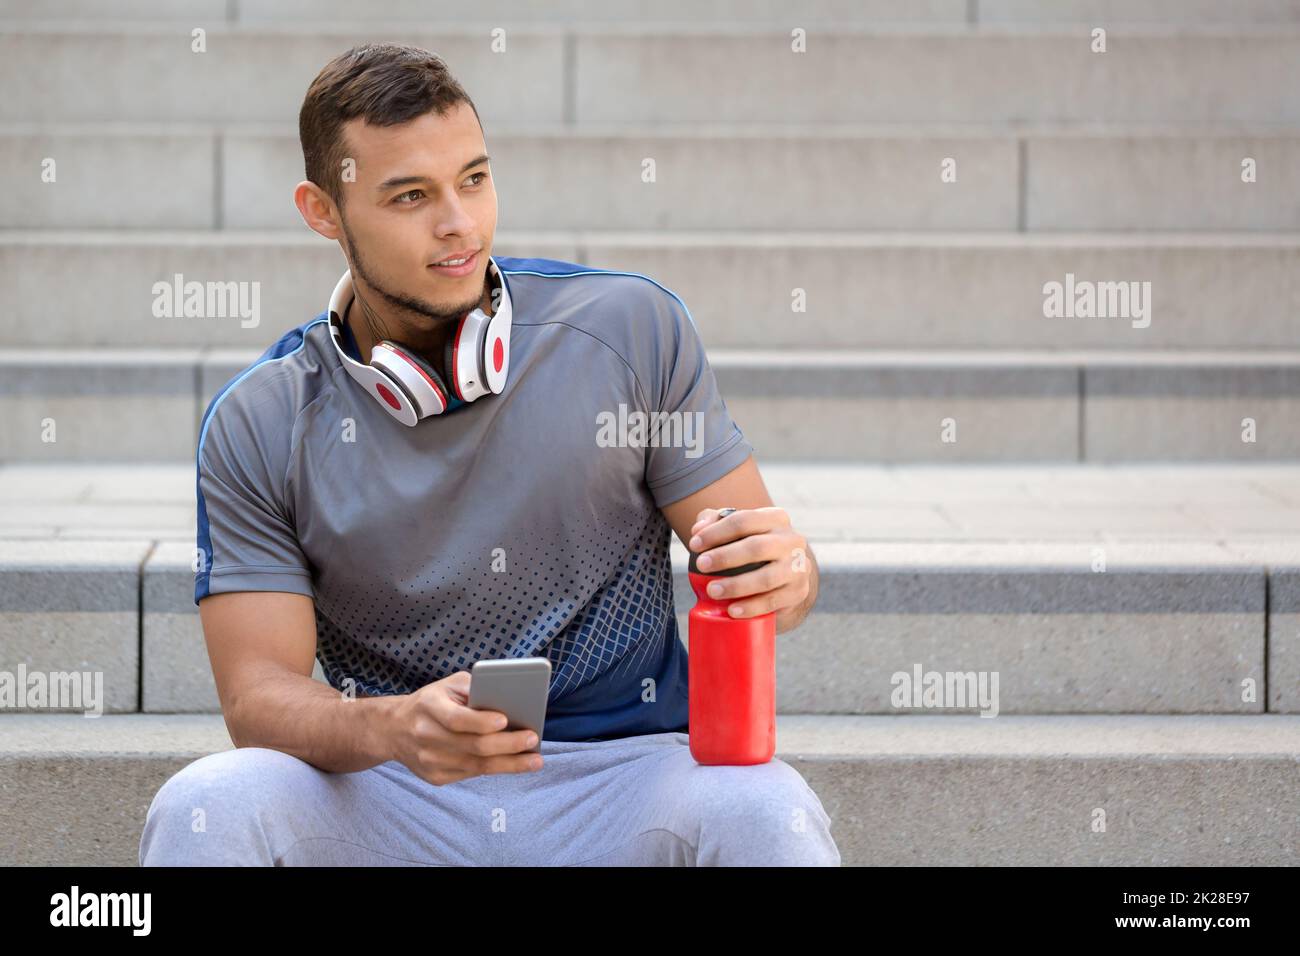 Young man listening to music listen headphones looking to the side copyspace copy space Stock Photo